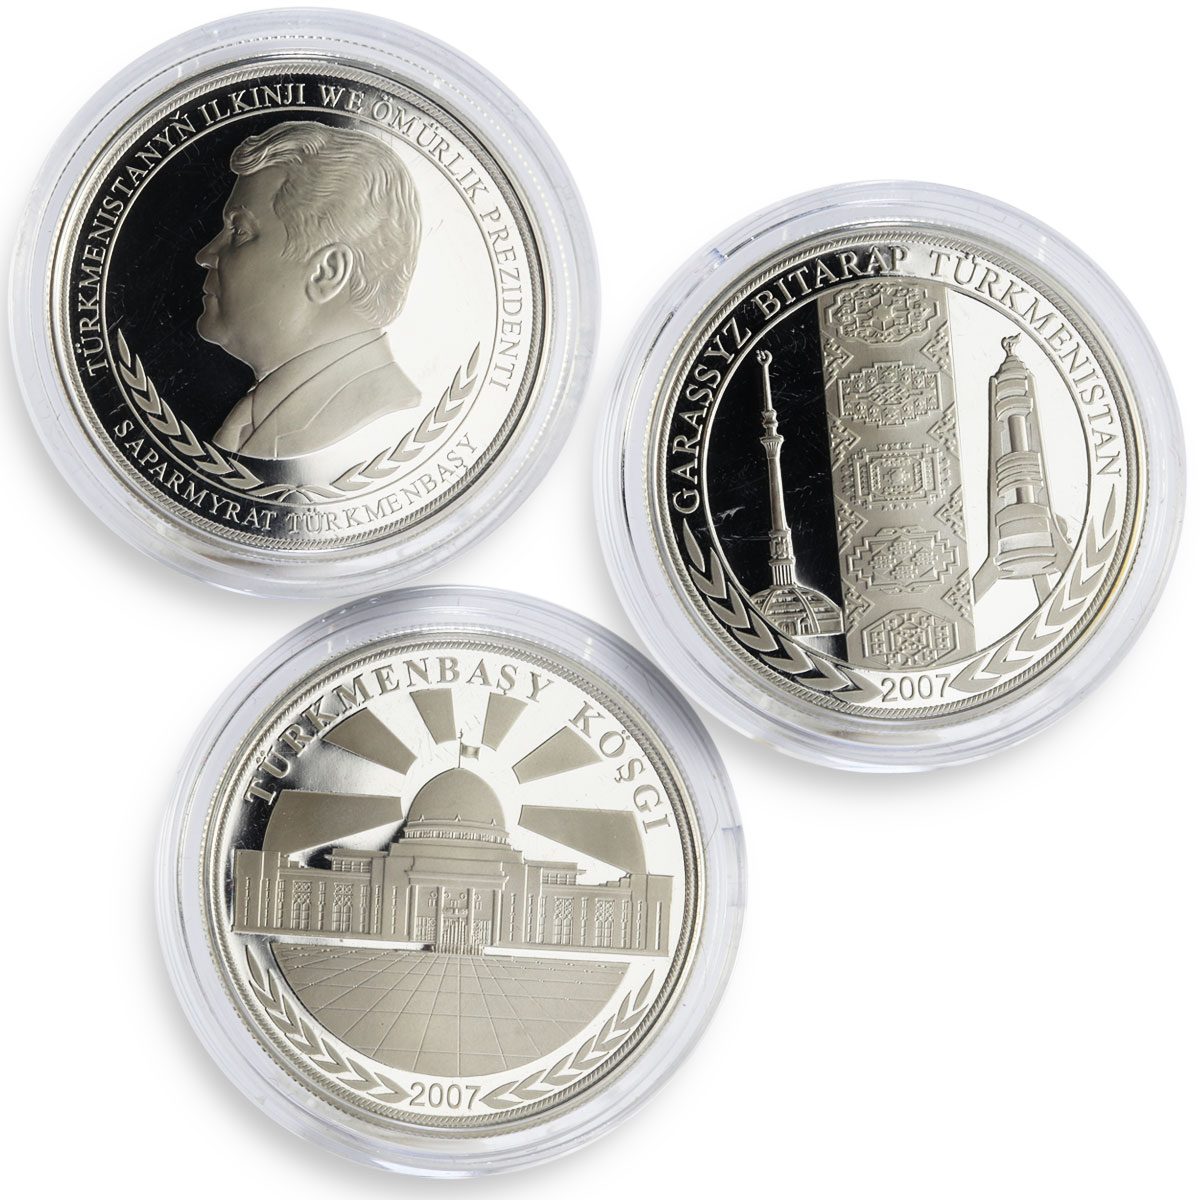 Turkmenistan set of 3 coins 15th Anniversary of the State Flag silver coins 2007